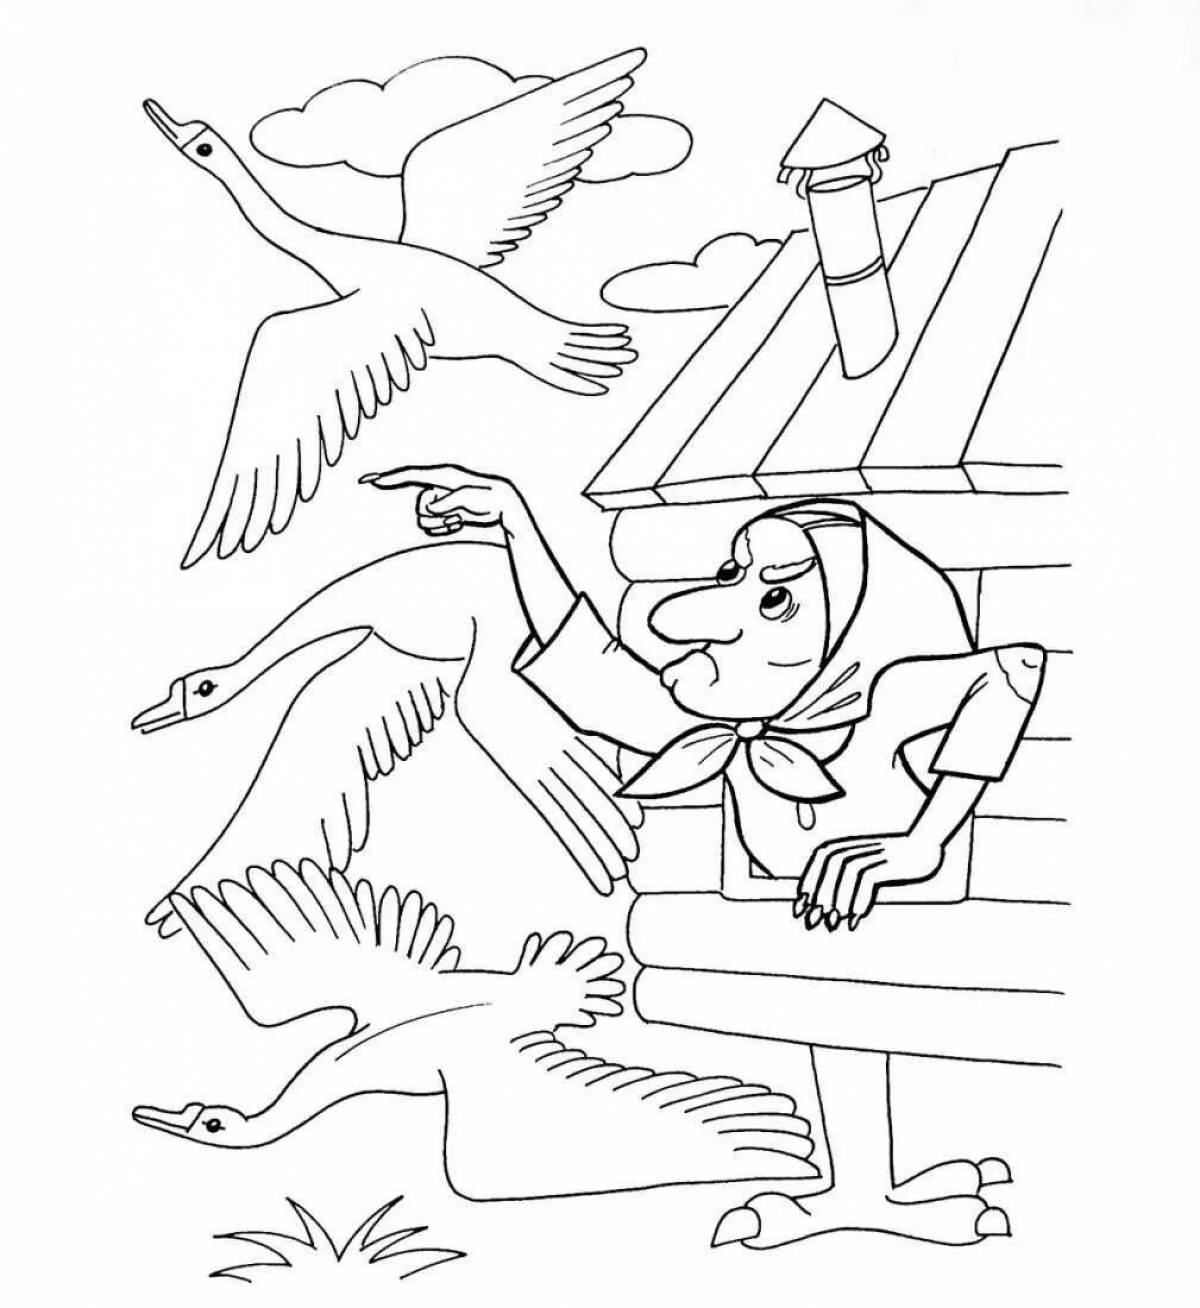 Dreamy swan geese coloring for kids